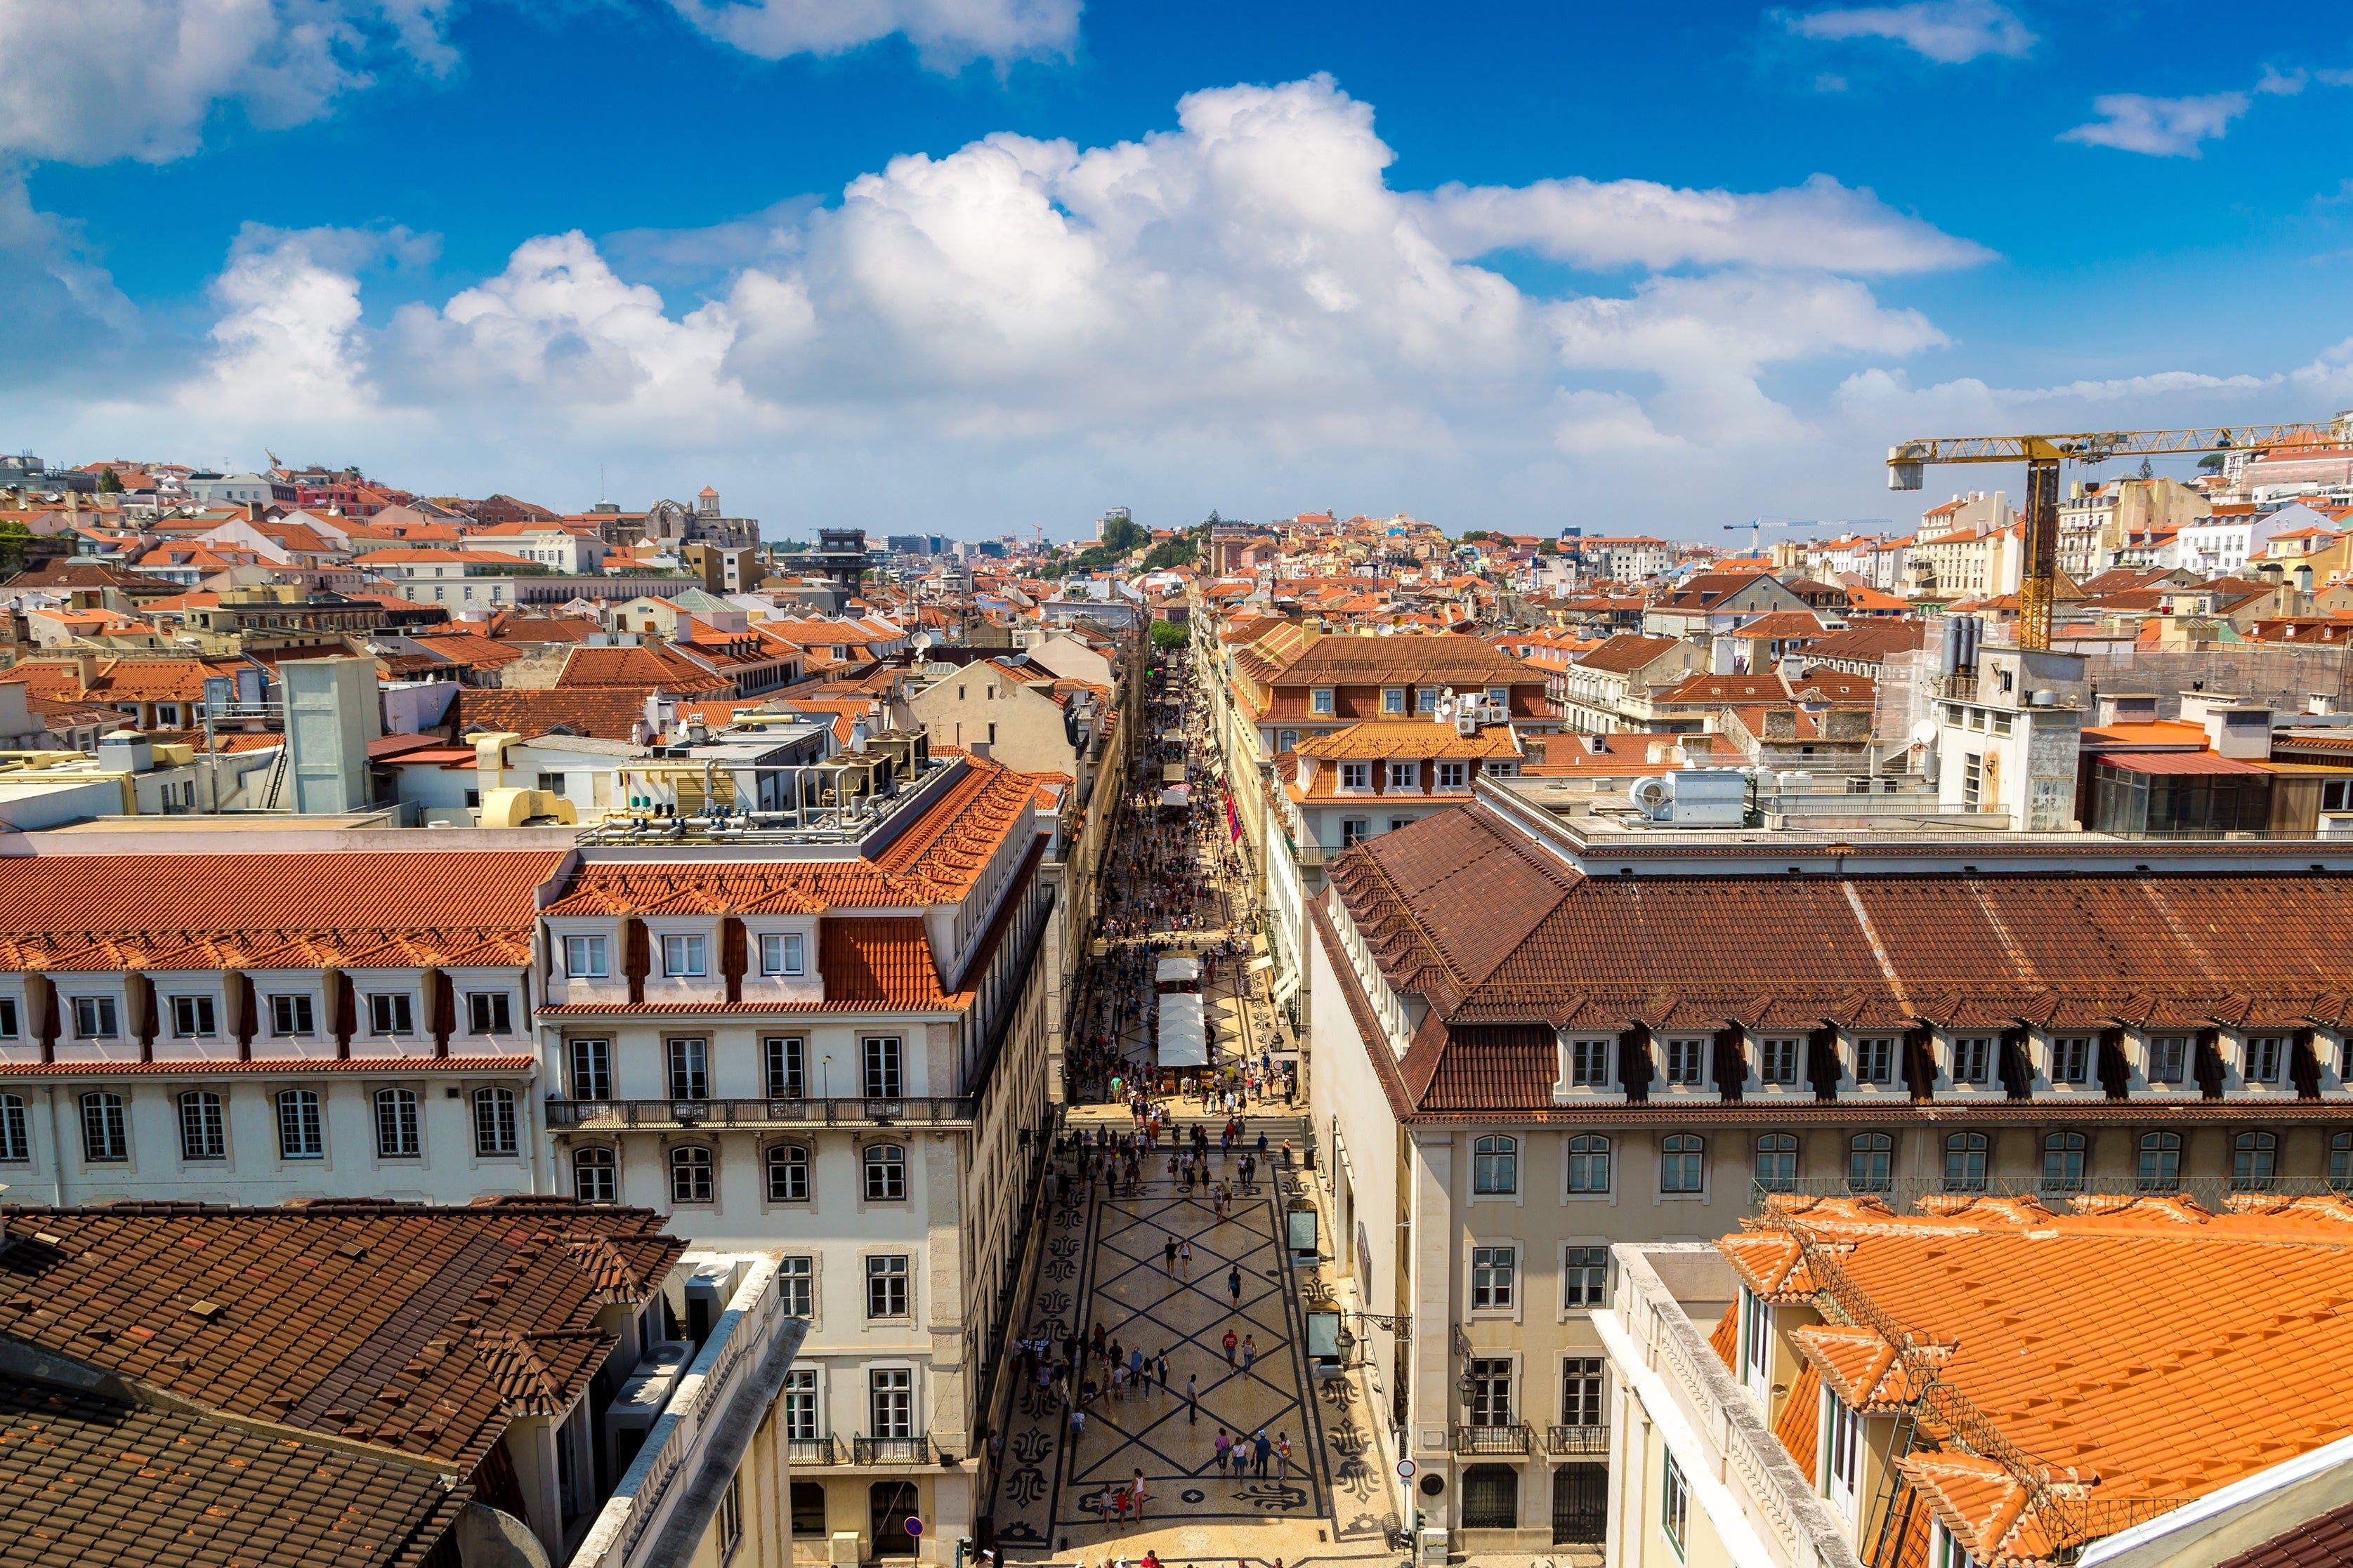 Spend some time exploring the beautiful cobbled laneways and gothic enclaves of Lisbon before embarking on your cruise